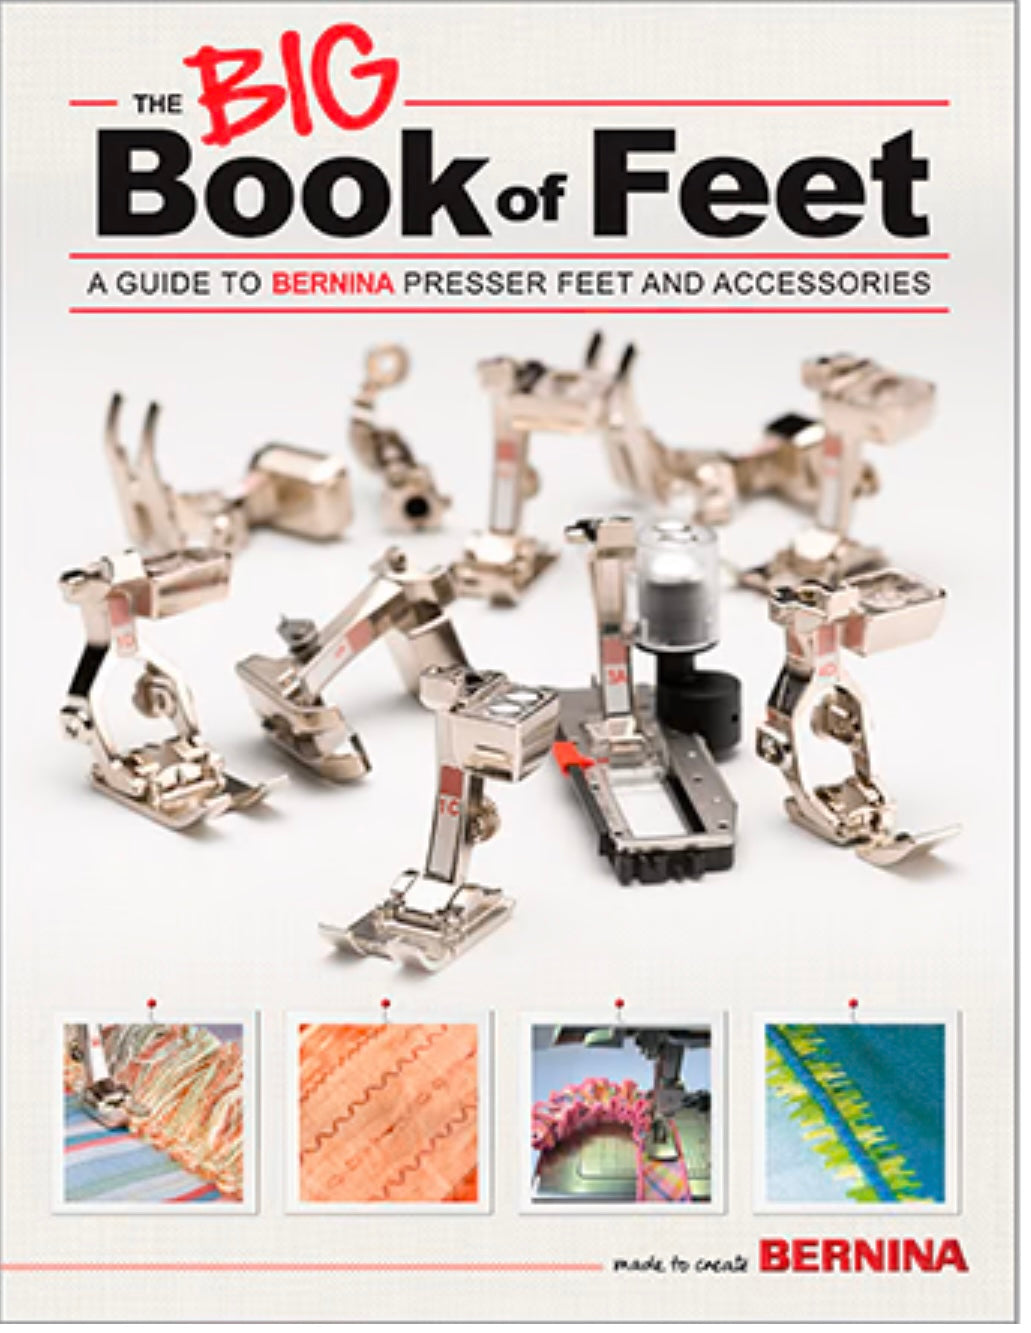 The BIG Book of Feet